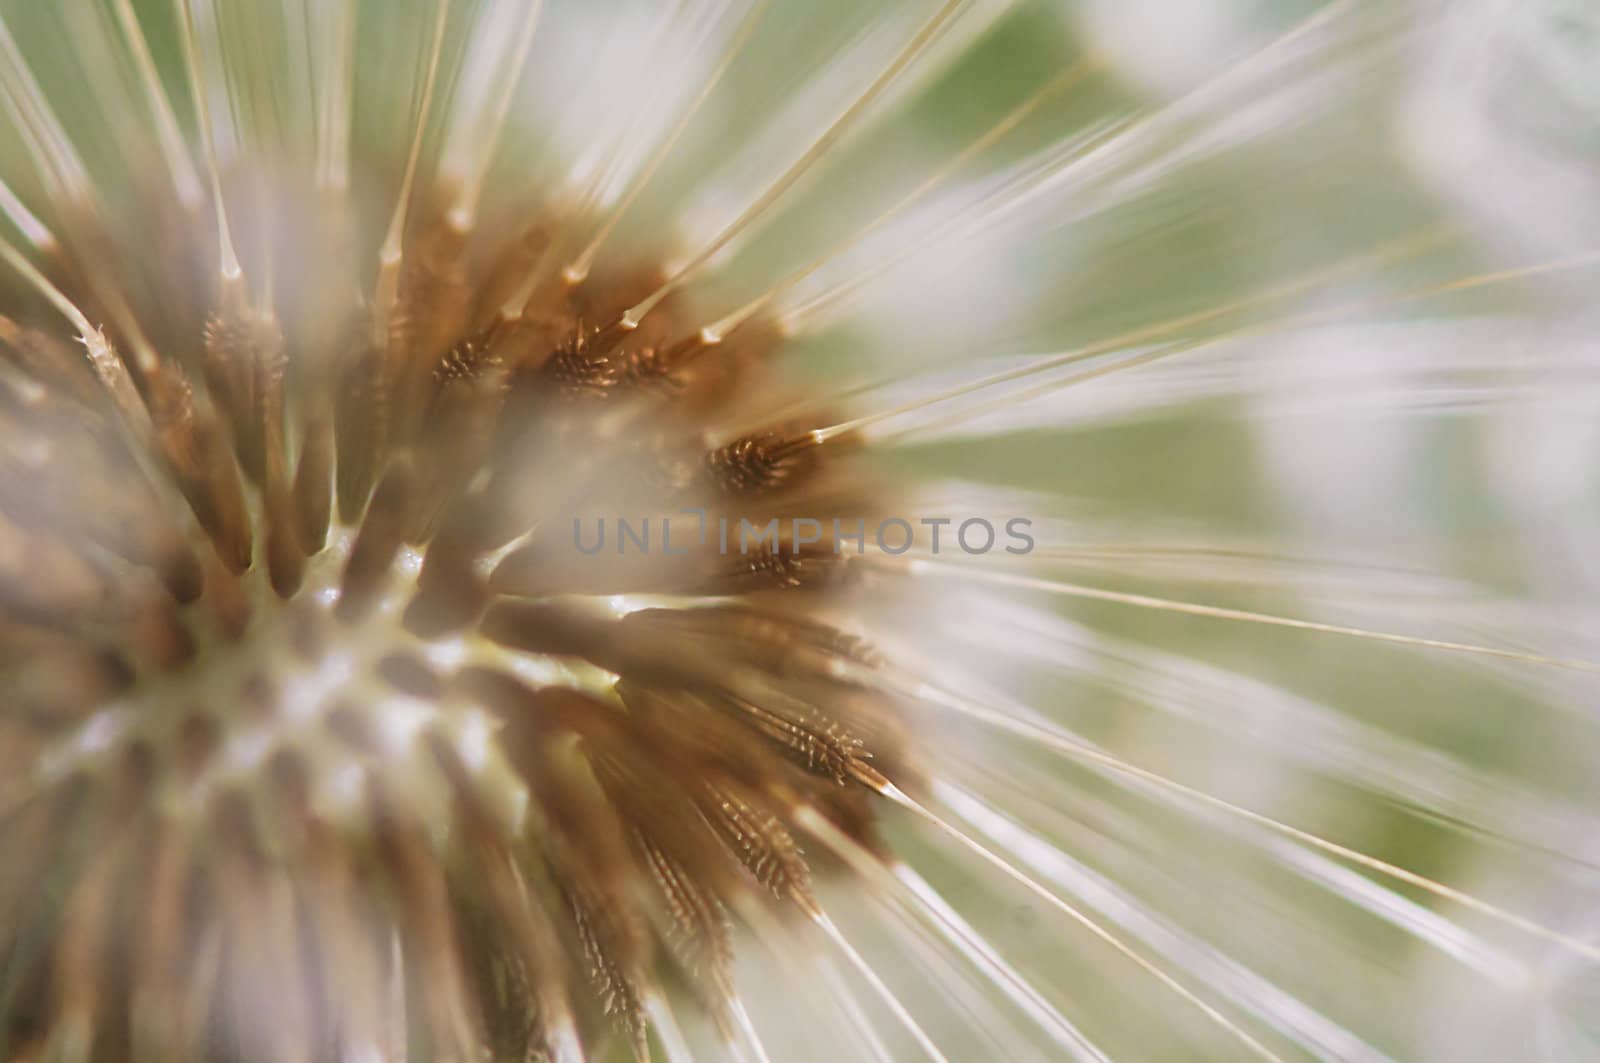 A close up view of a beautiful dandelion blossom in a fresh spring garden.